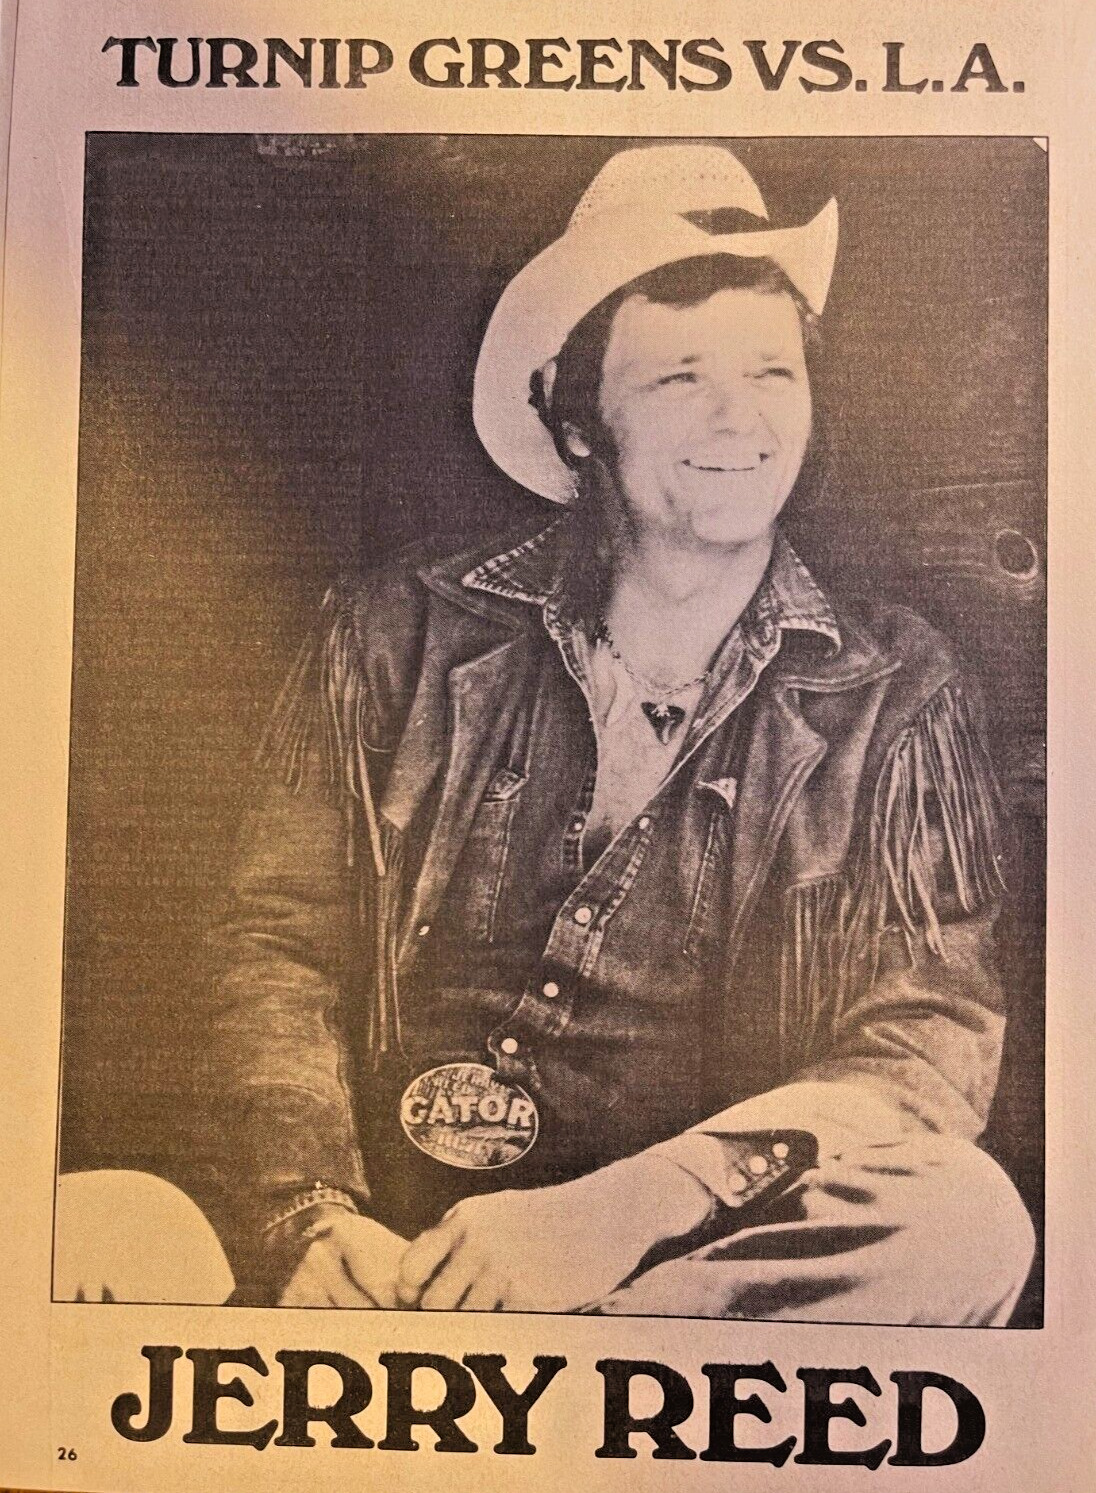 1980 Country Songwriter Jerry Reed